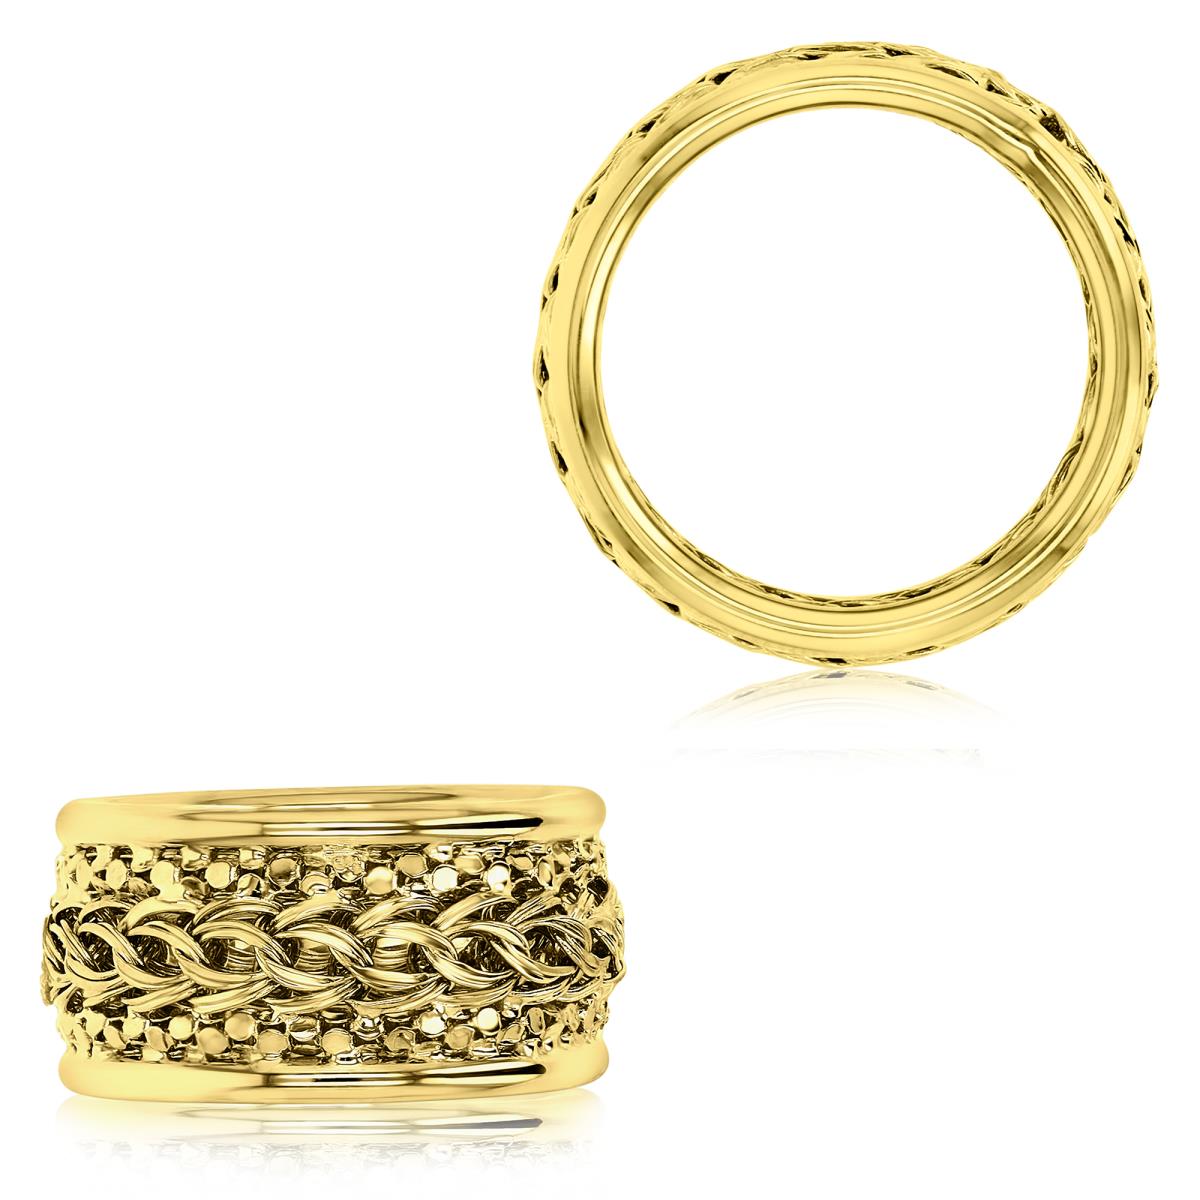 10K Yellow Gold 11mm Mixed Link Fashion Ring